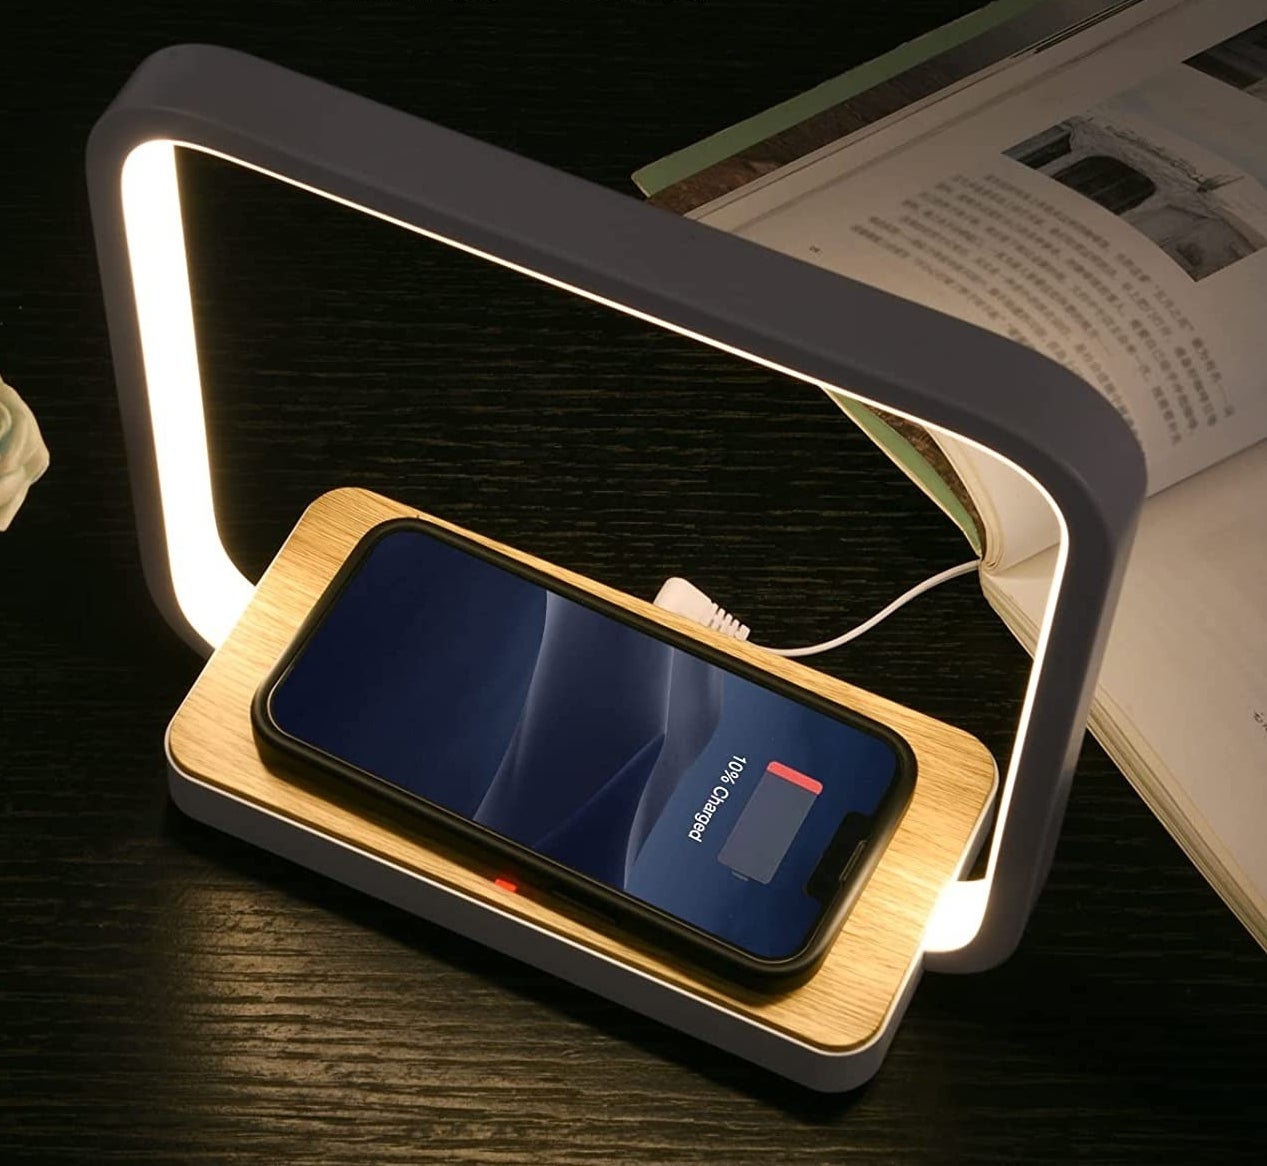 the lamp with a phone charging on it